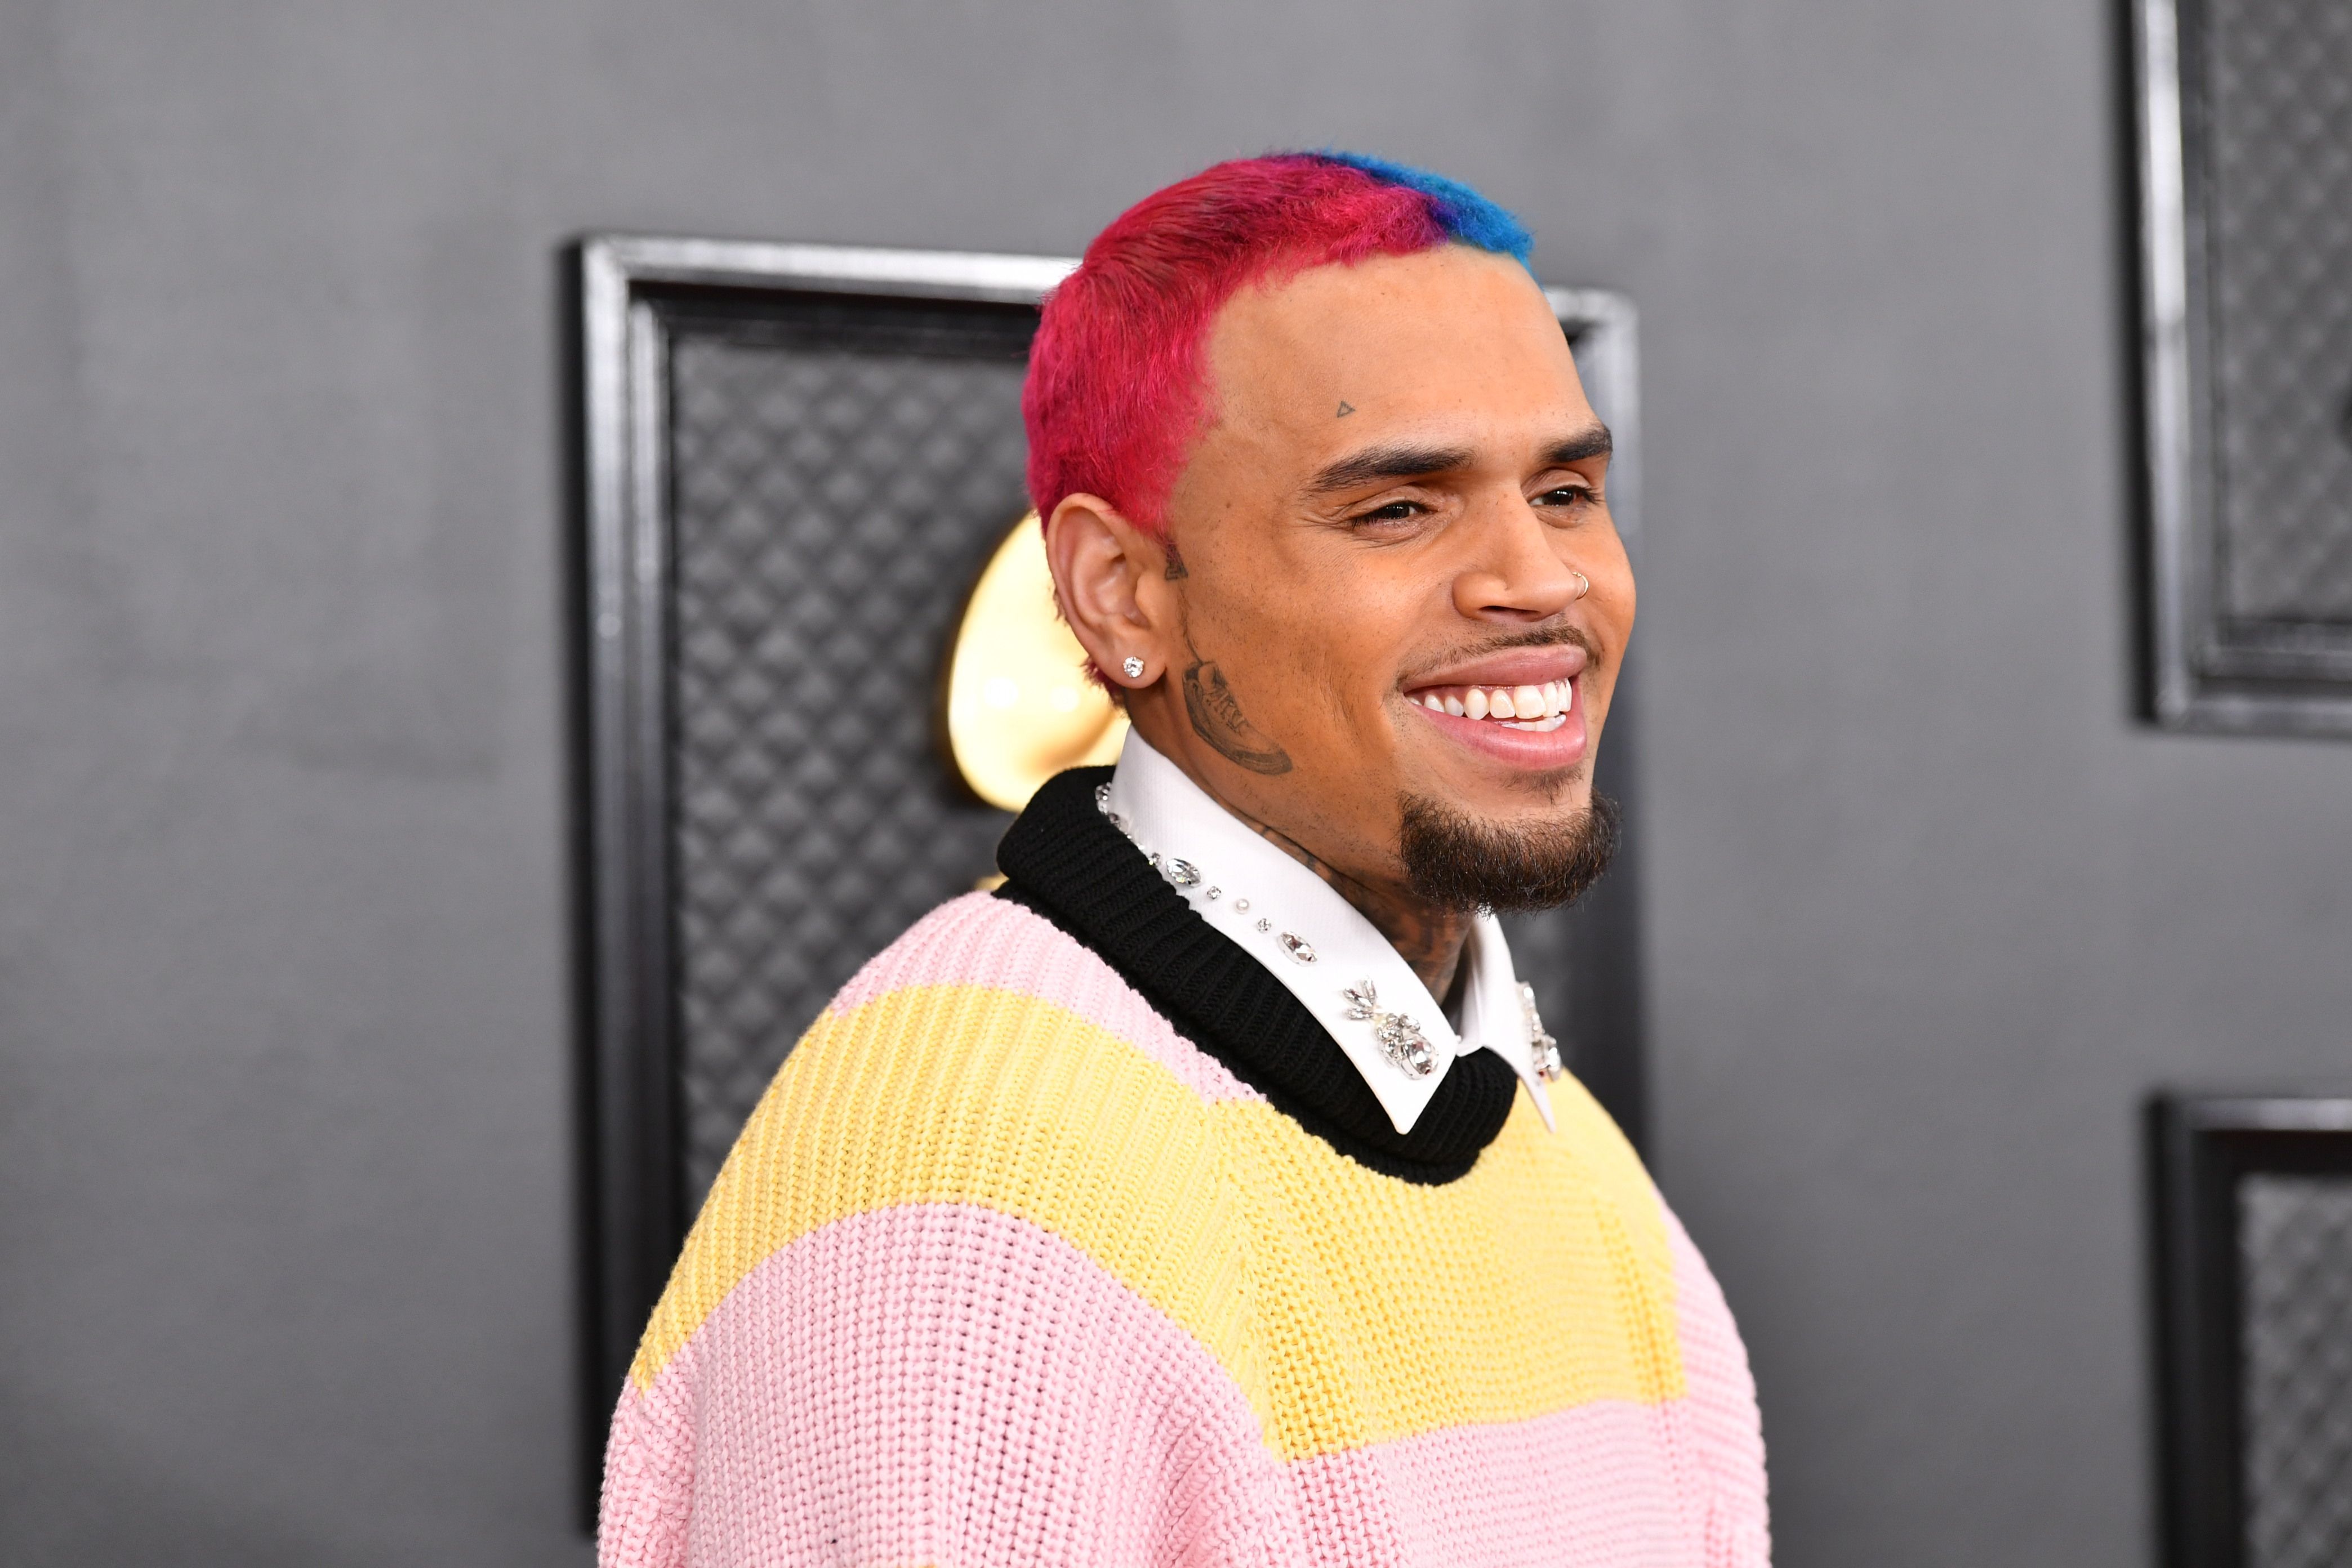 Chris Brown during the 62nd Annual Grammy Awards at Staples Center on January 26, 2020 in Los Angeles, California. | Source: Getty Images